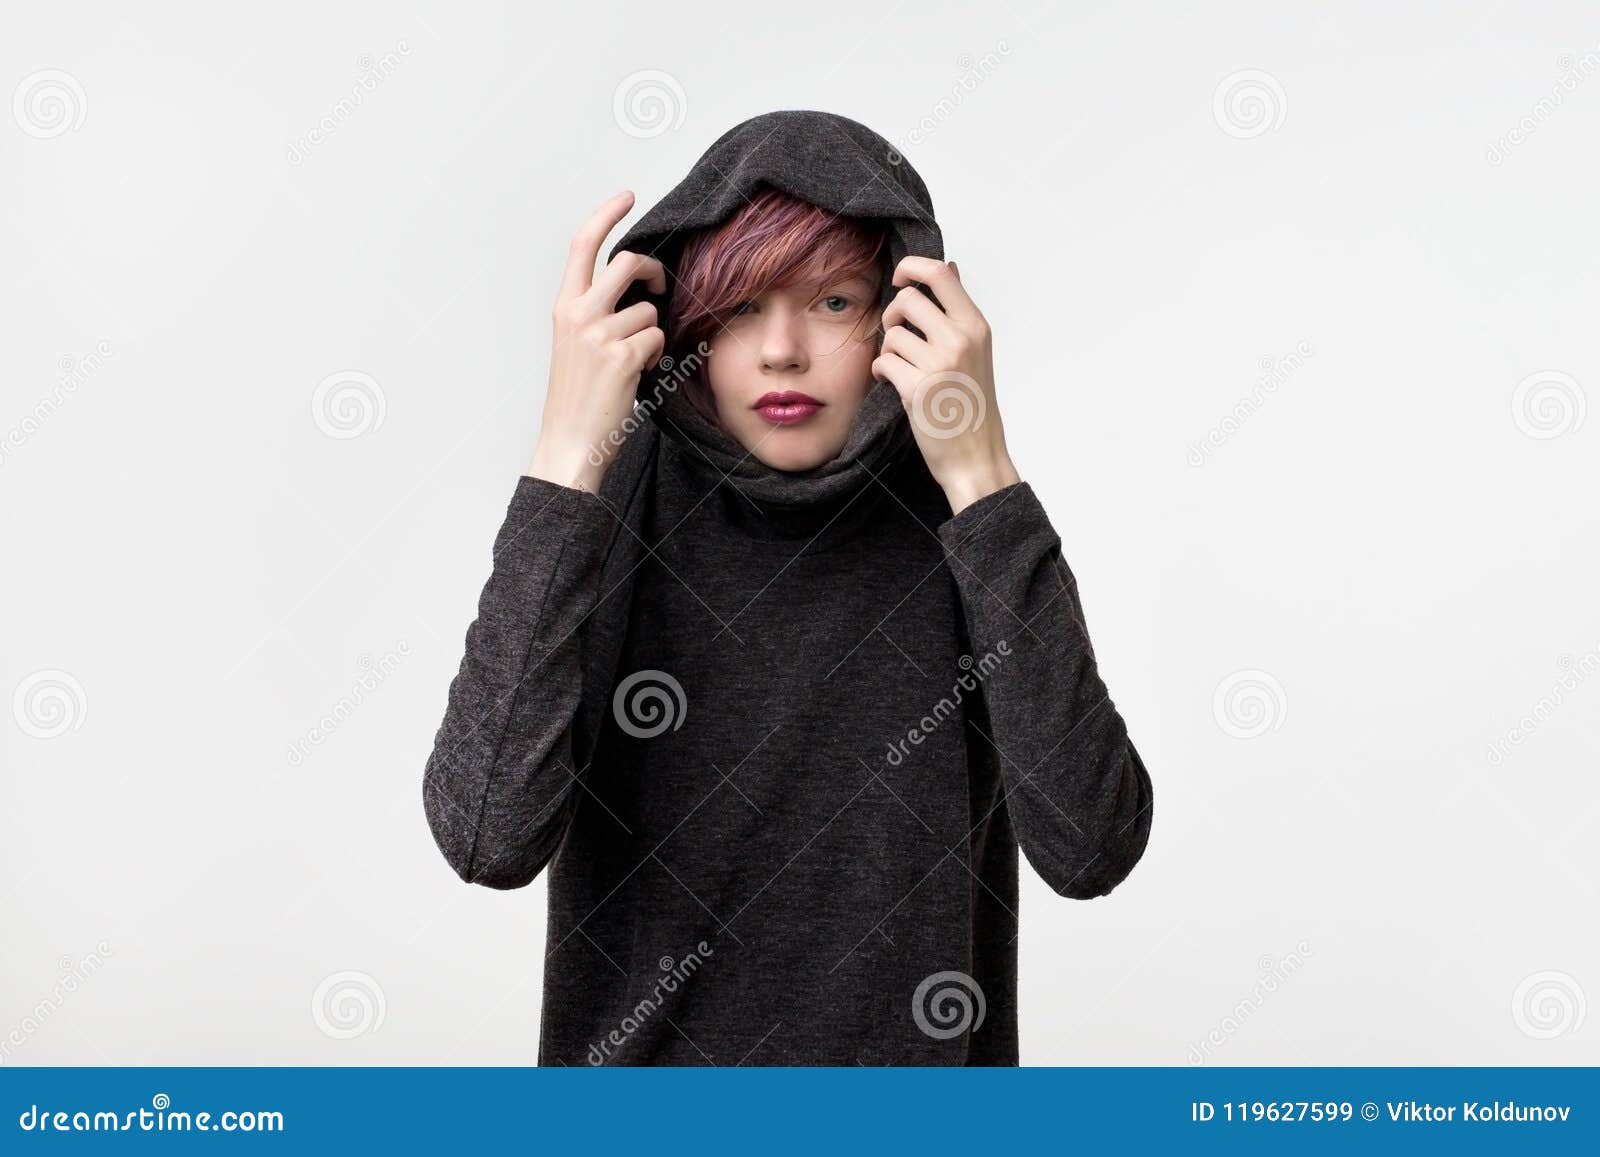 Portrait Of Unusual Informal Pretty Woman With Colorful Hairstyle She Is Pulling Up Hood And 